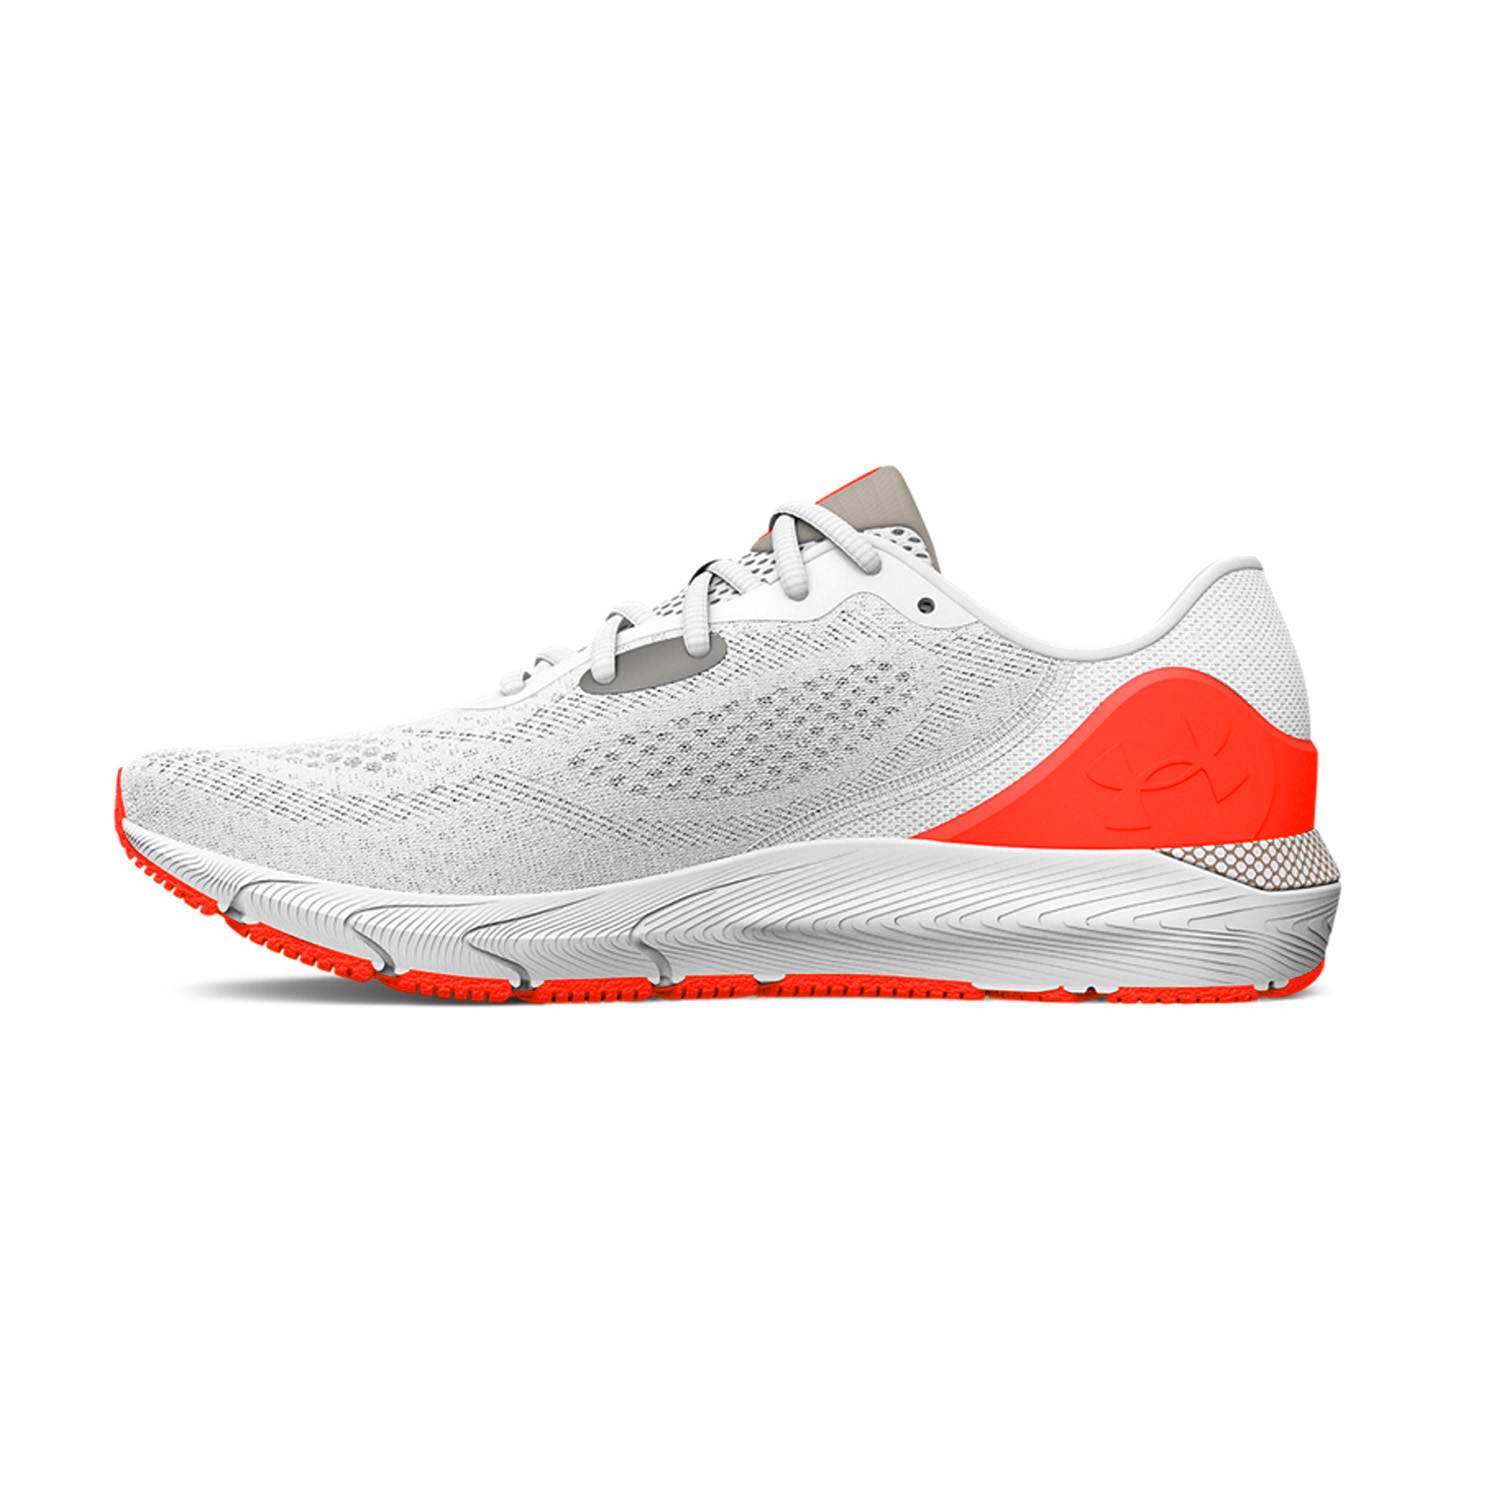 Under Armour HOVR Sonic 5 - White/Bolt Red/Metallic Pewter